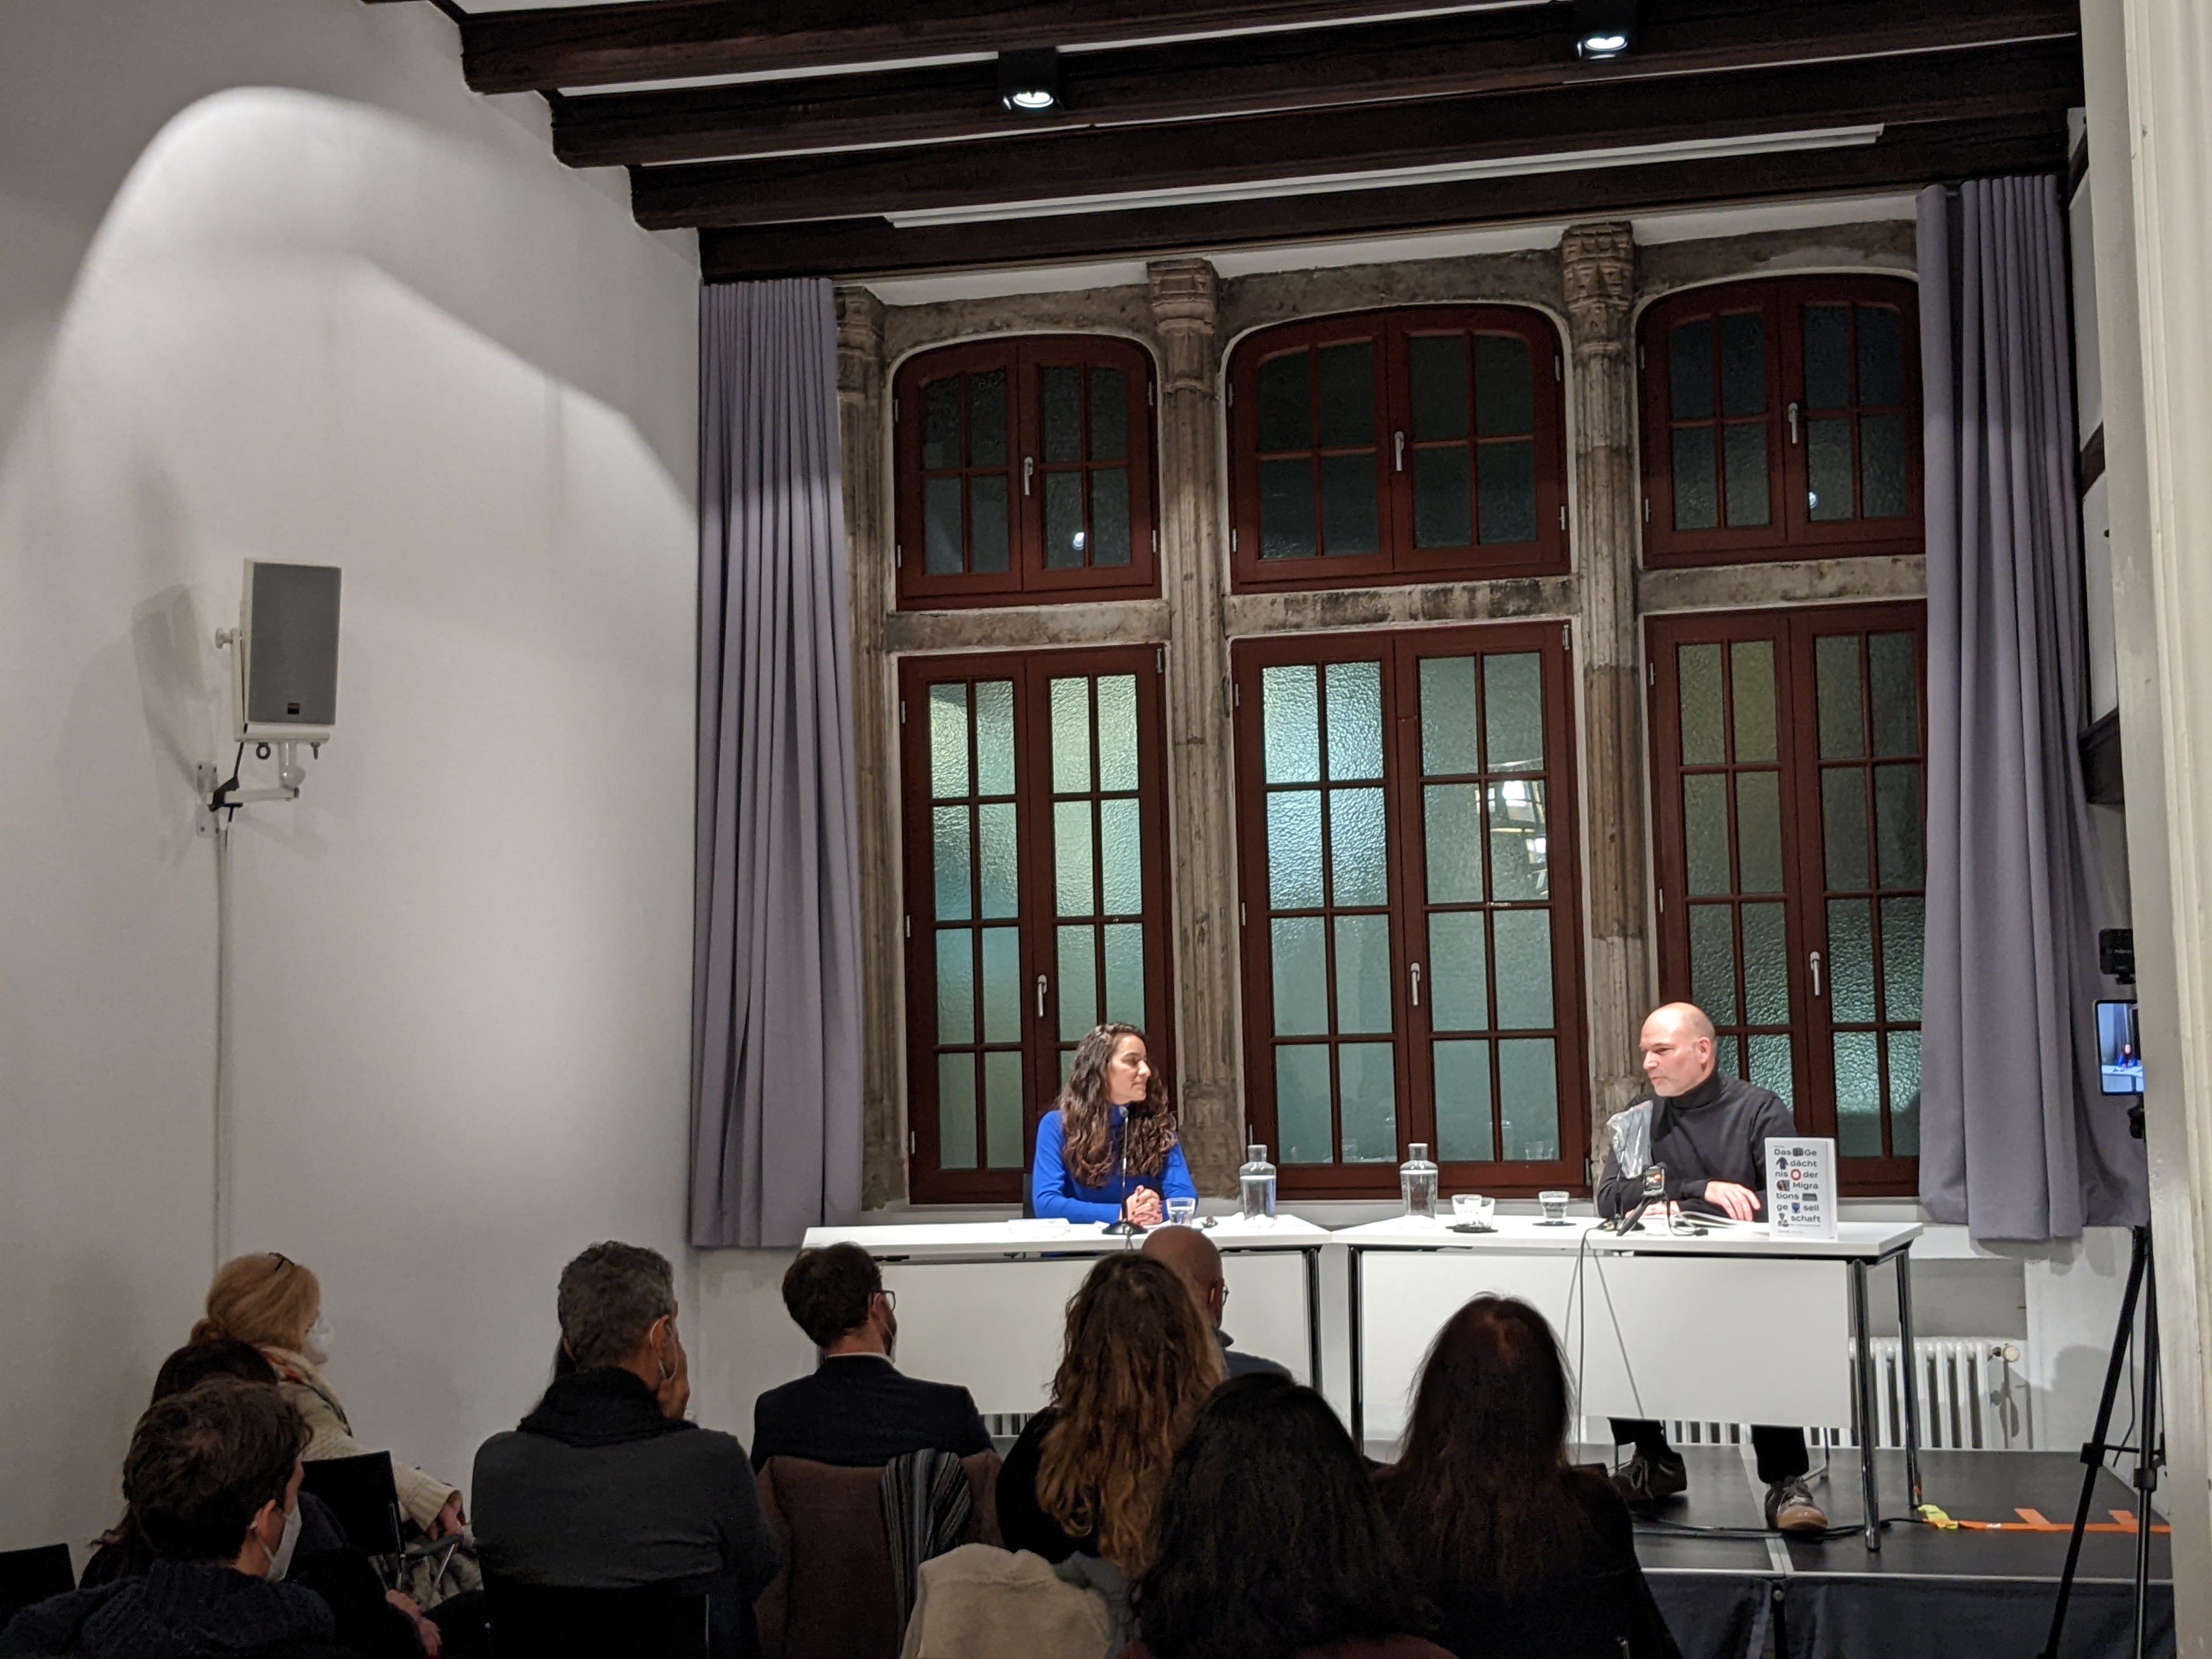 The literary scientist Maryam Aras in conversation with the book author Manuel Gogos.